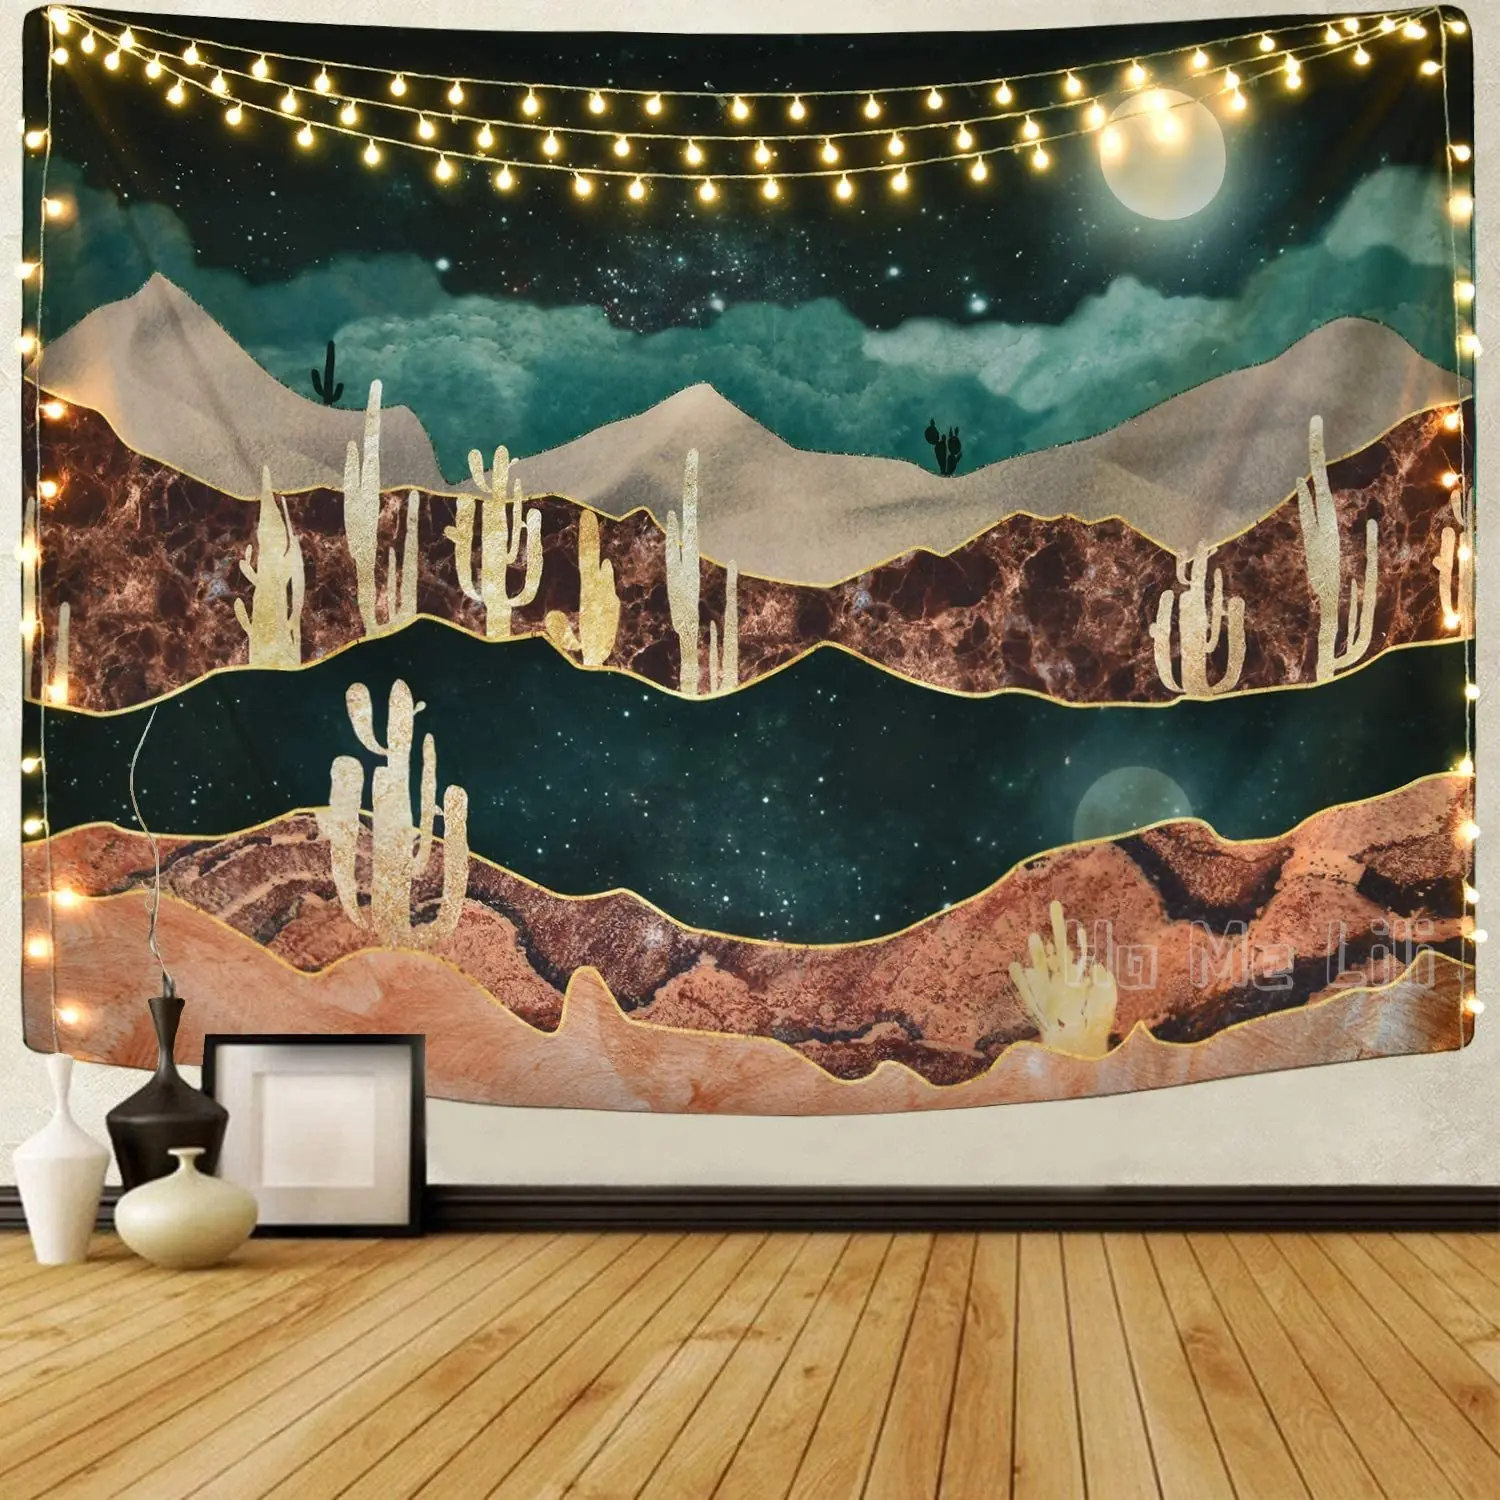 

Mountain Moon Tapestry Desert Cactus Starry Night Nature Landscape Wall Hanging For Room Decor